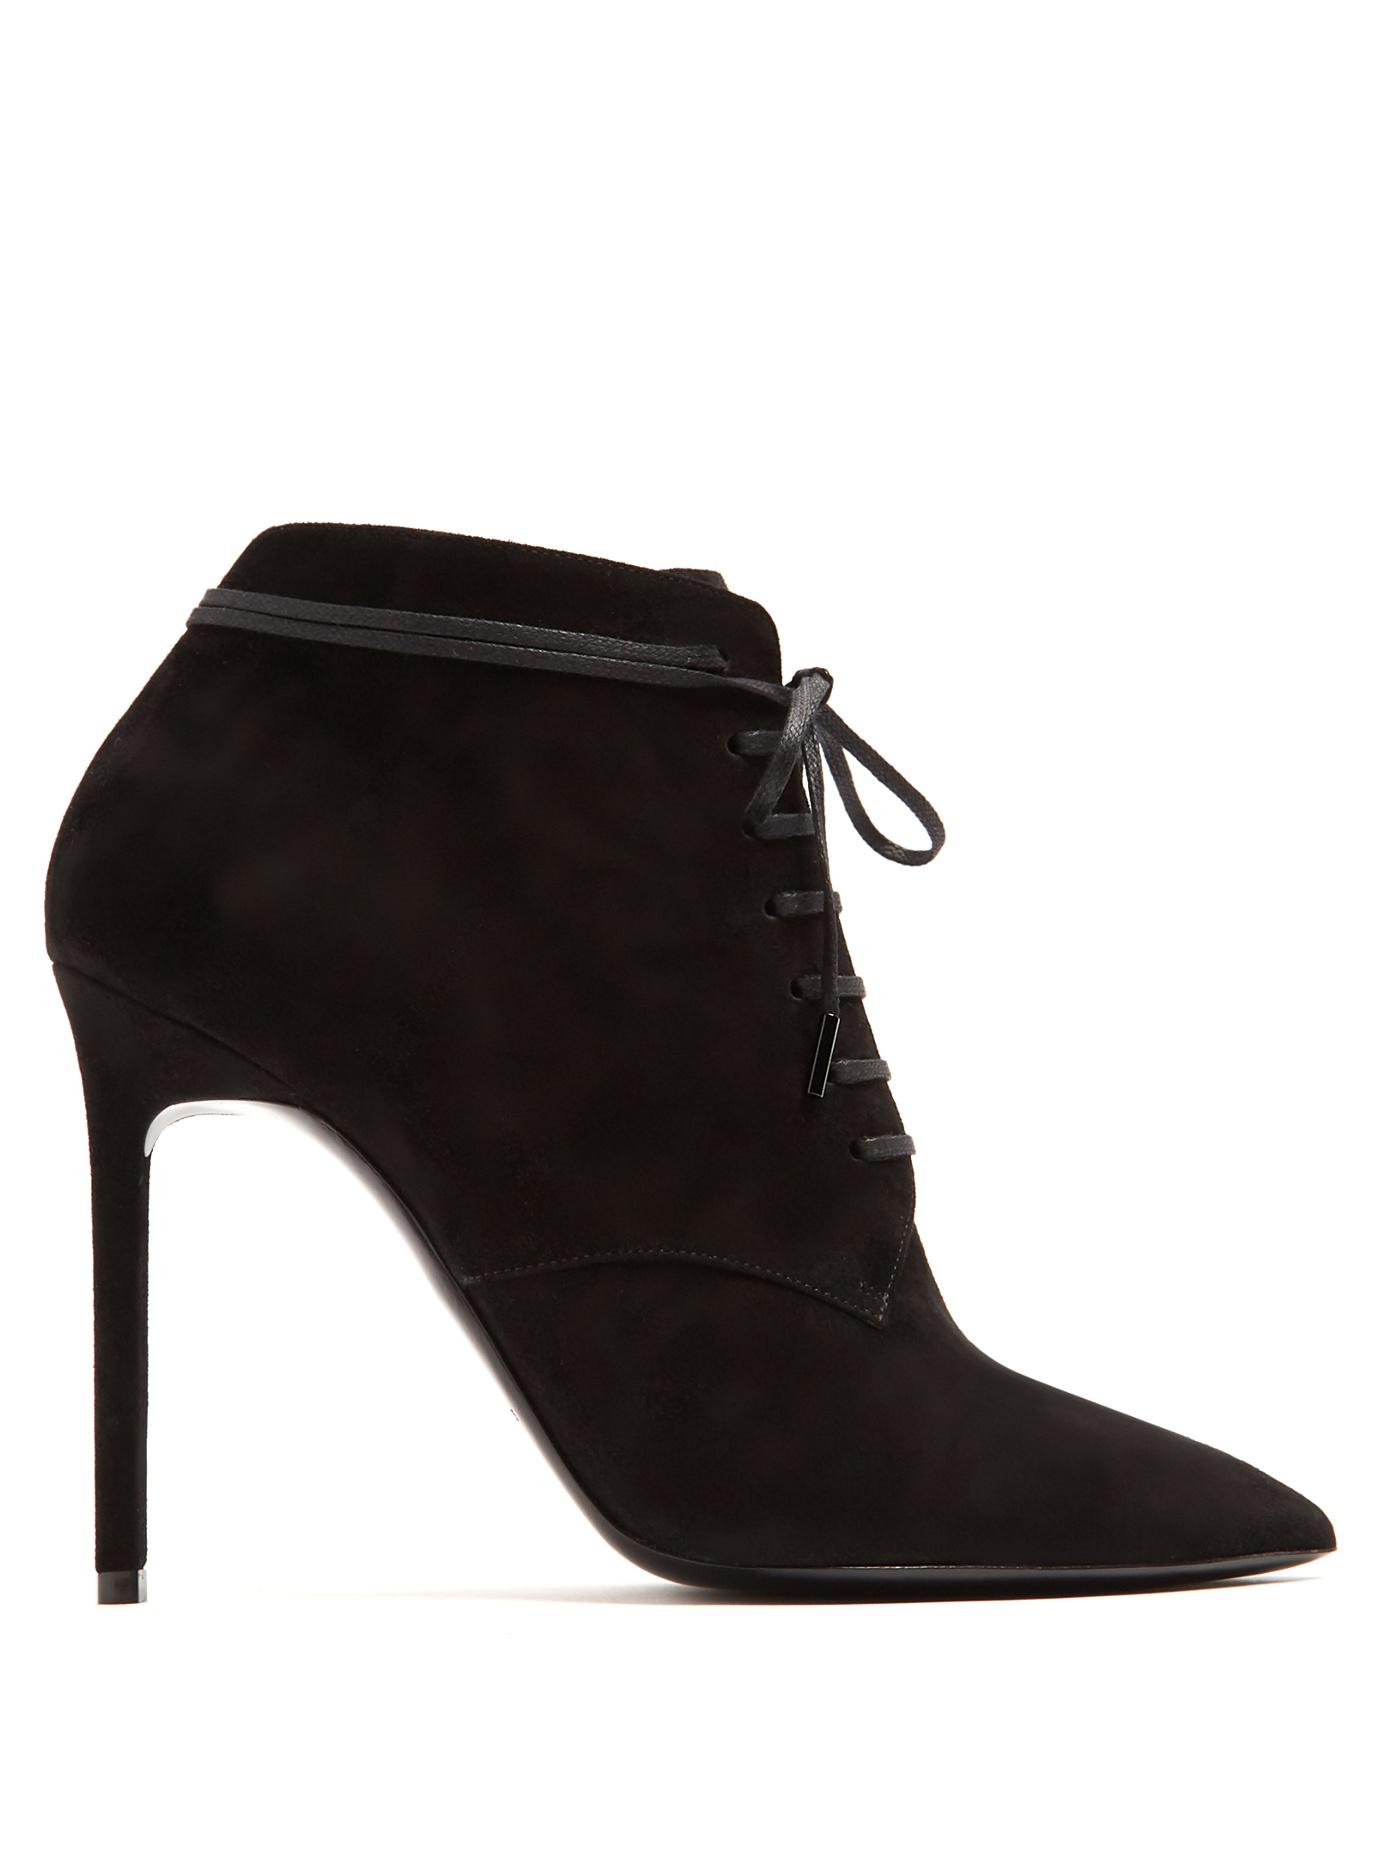 Saint laurent Anja Suede Lace-up Ankle Boots in Black | Lyst